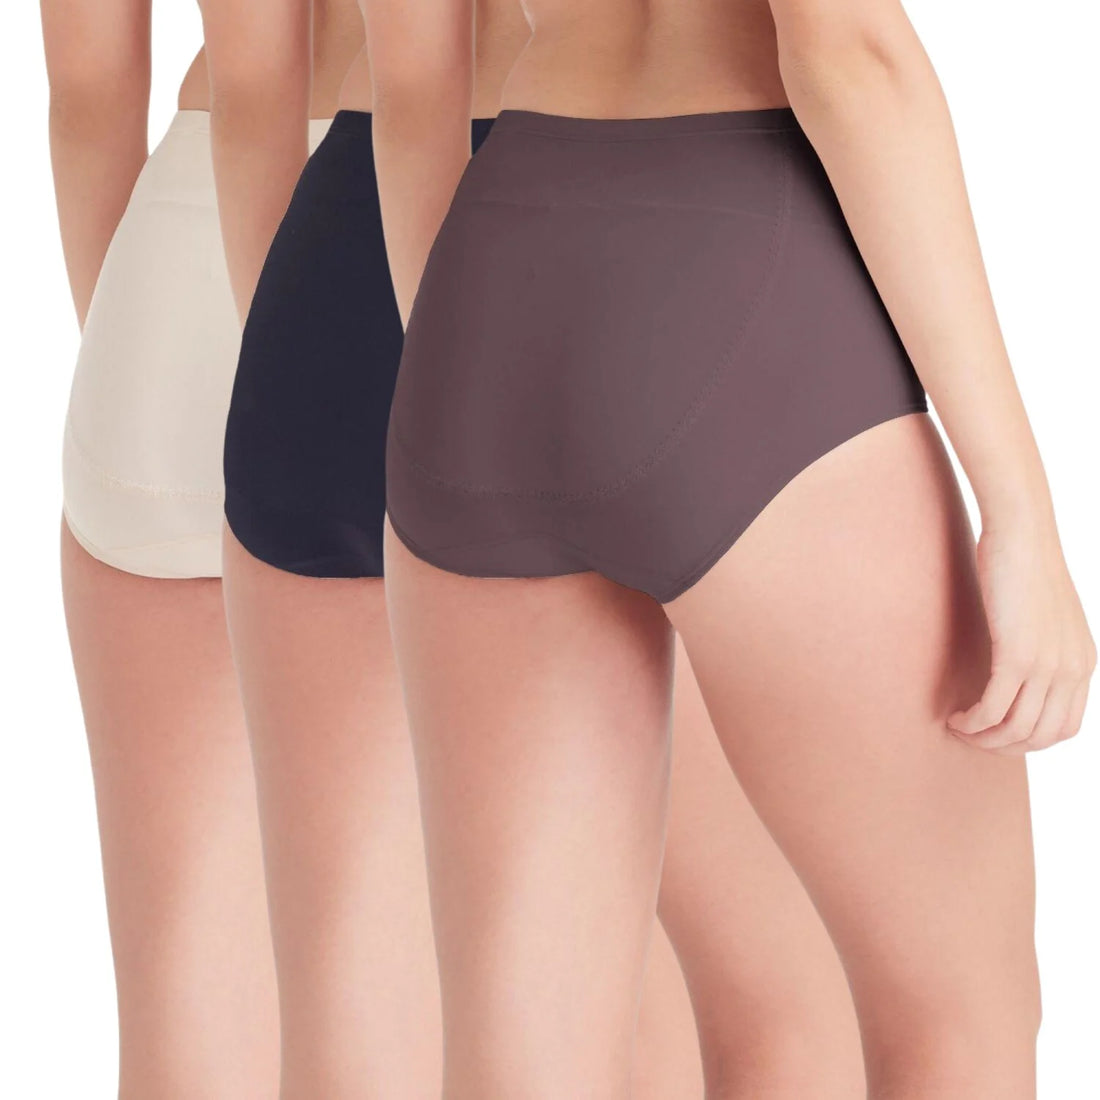 Wacoal U-fit Extra, underwear that does not help to tighten the abdomen  Full figure set, 3 pieces, model WU4T38, assorted colors (black-beige-burnt